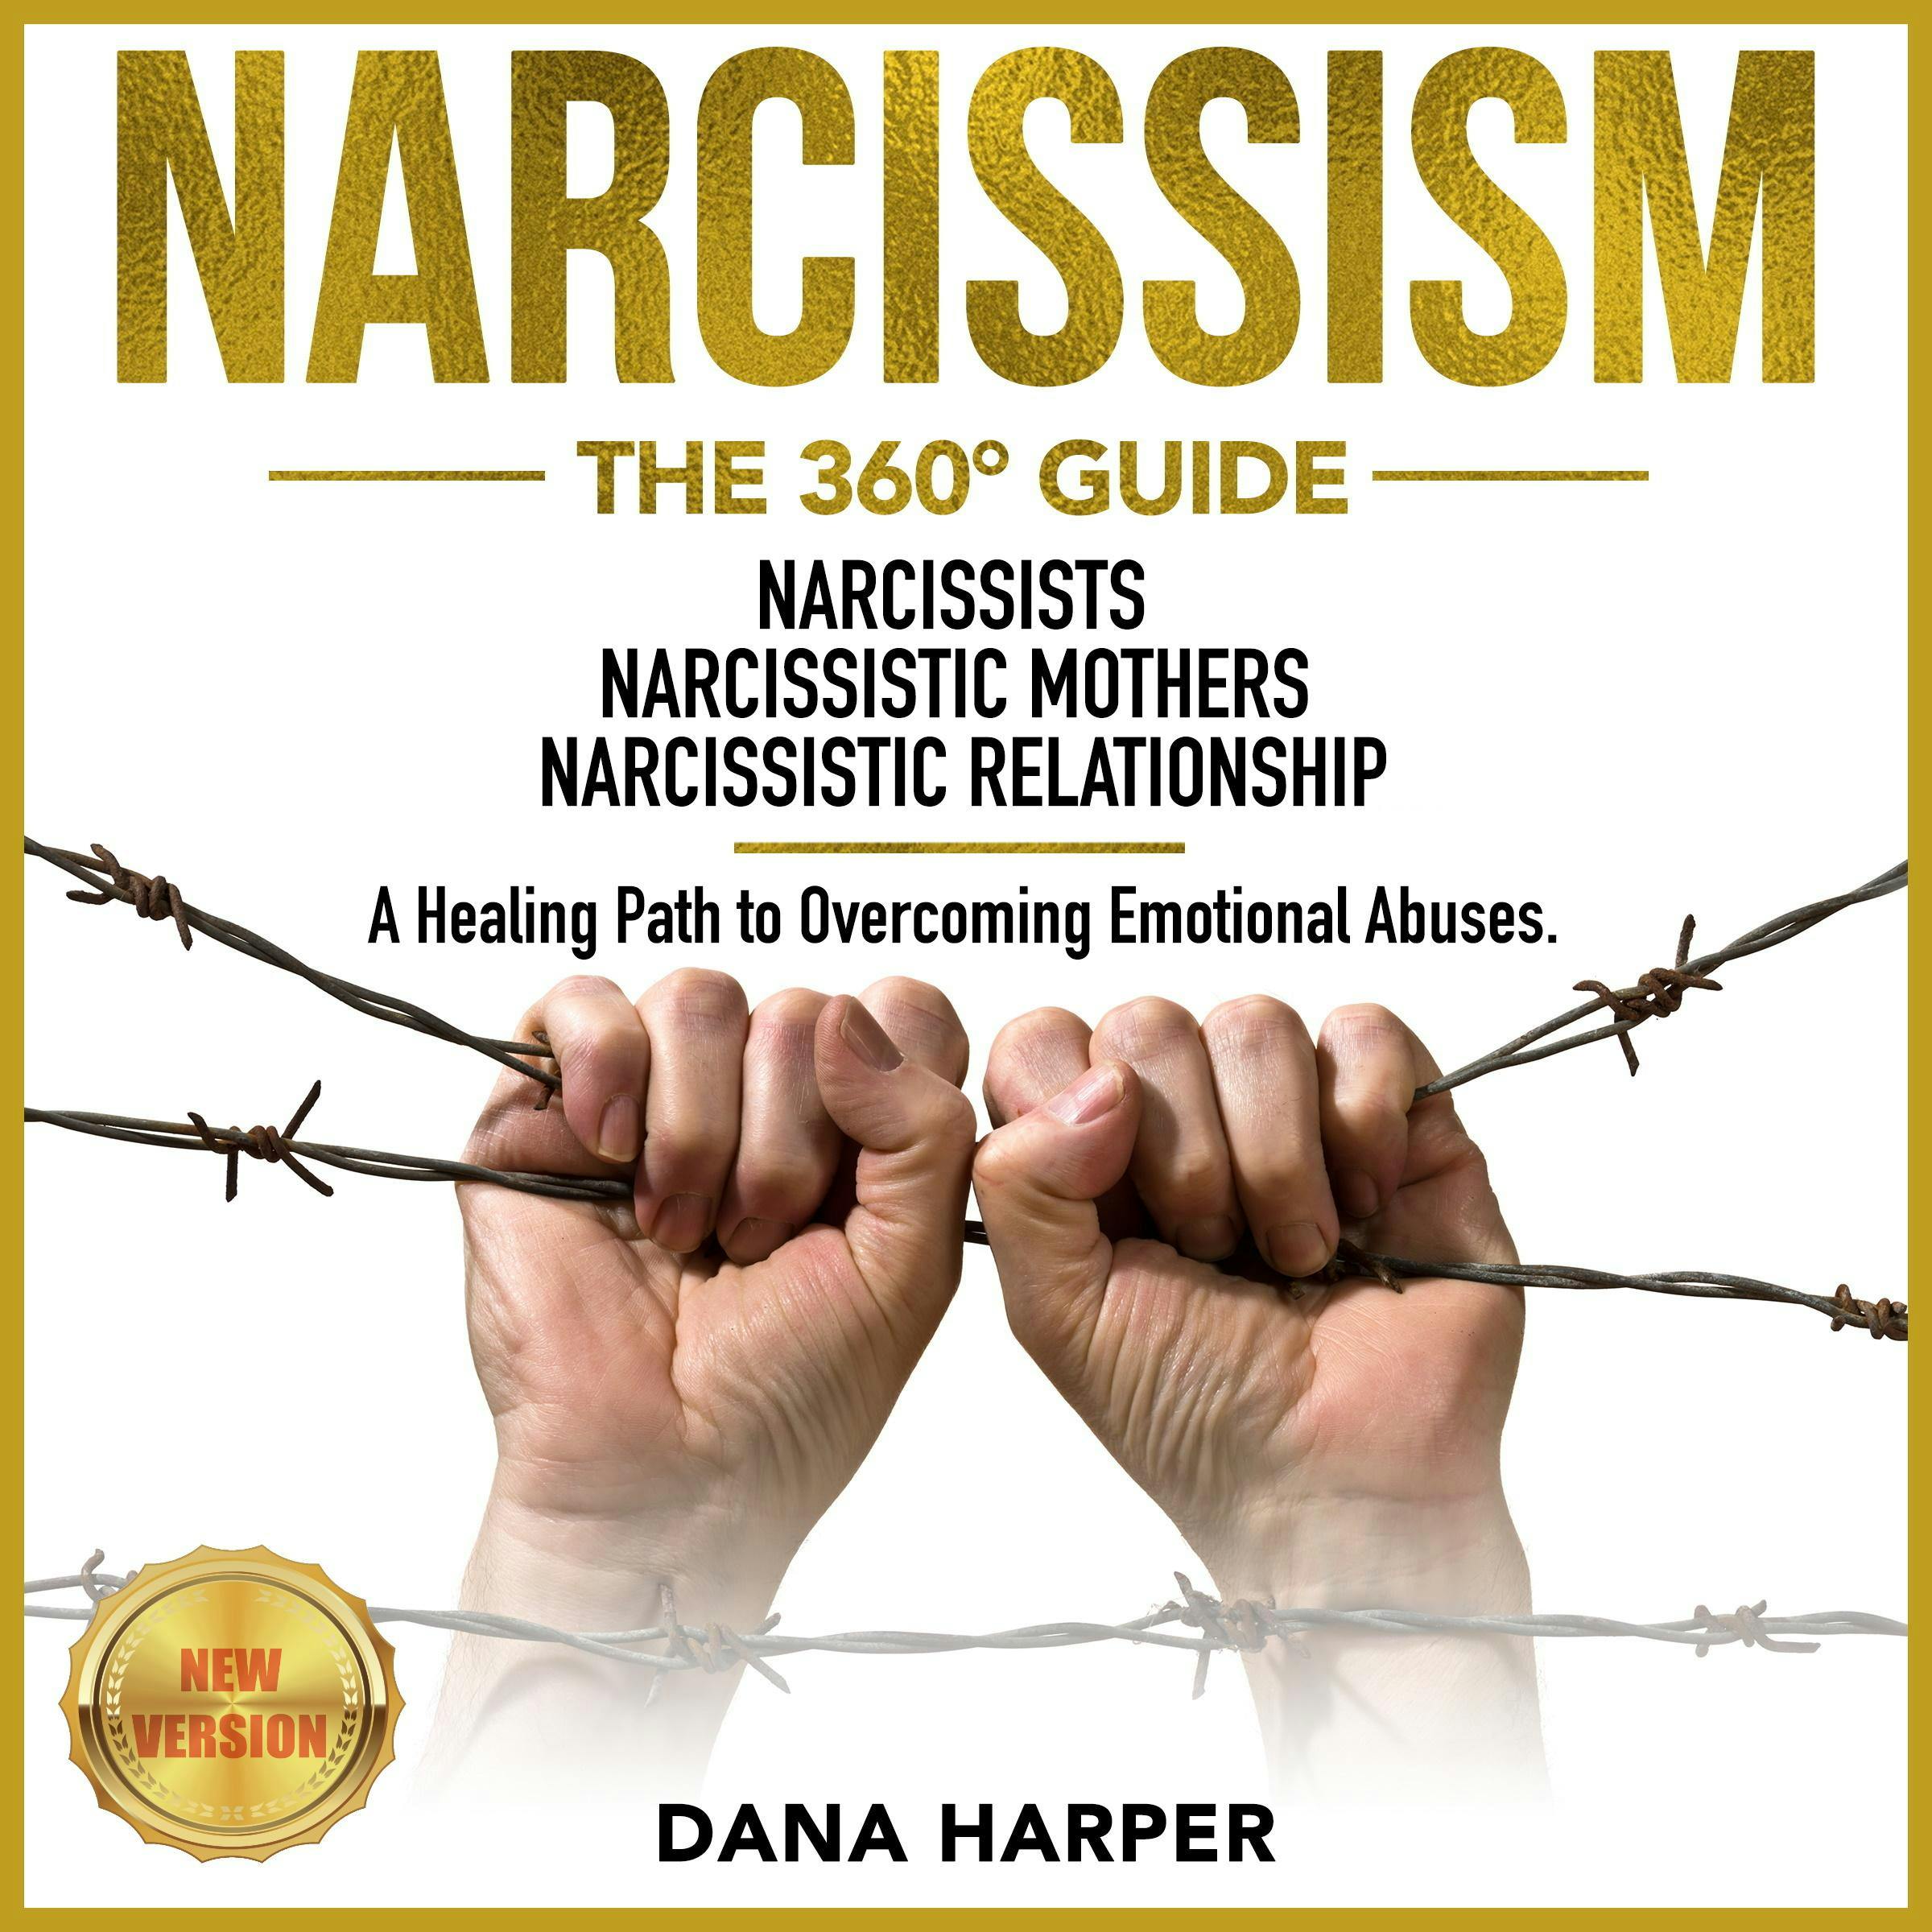 NARCISSISM: The 360° Guide. NARCISSISTS | NARCISSISTIC MOTHERS | NARCISSISTIC RELATIONSHIP. A Healing Path to Overcoming Emotional Abuses. NEW VERSION - undefined